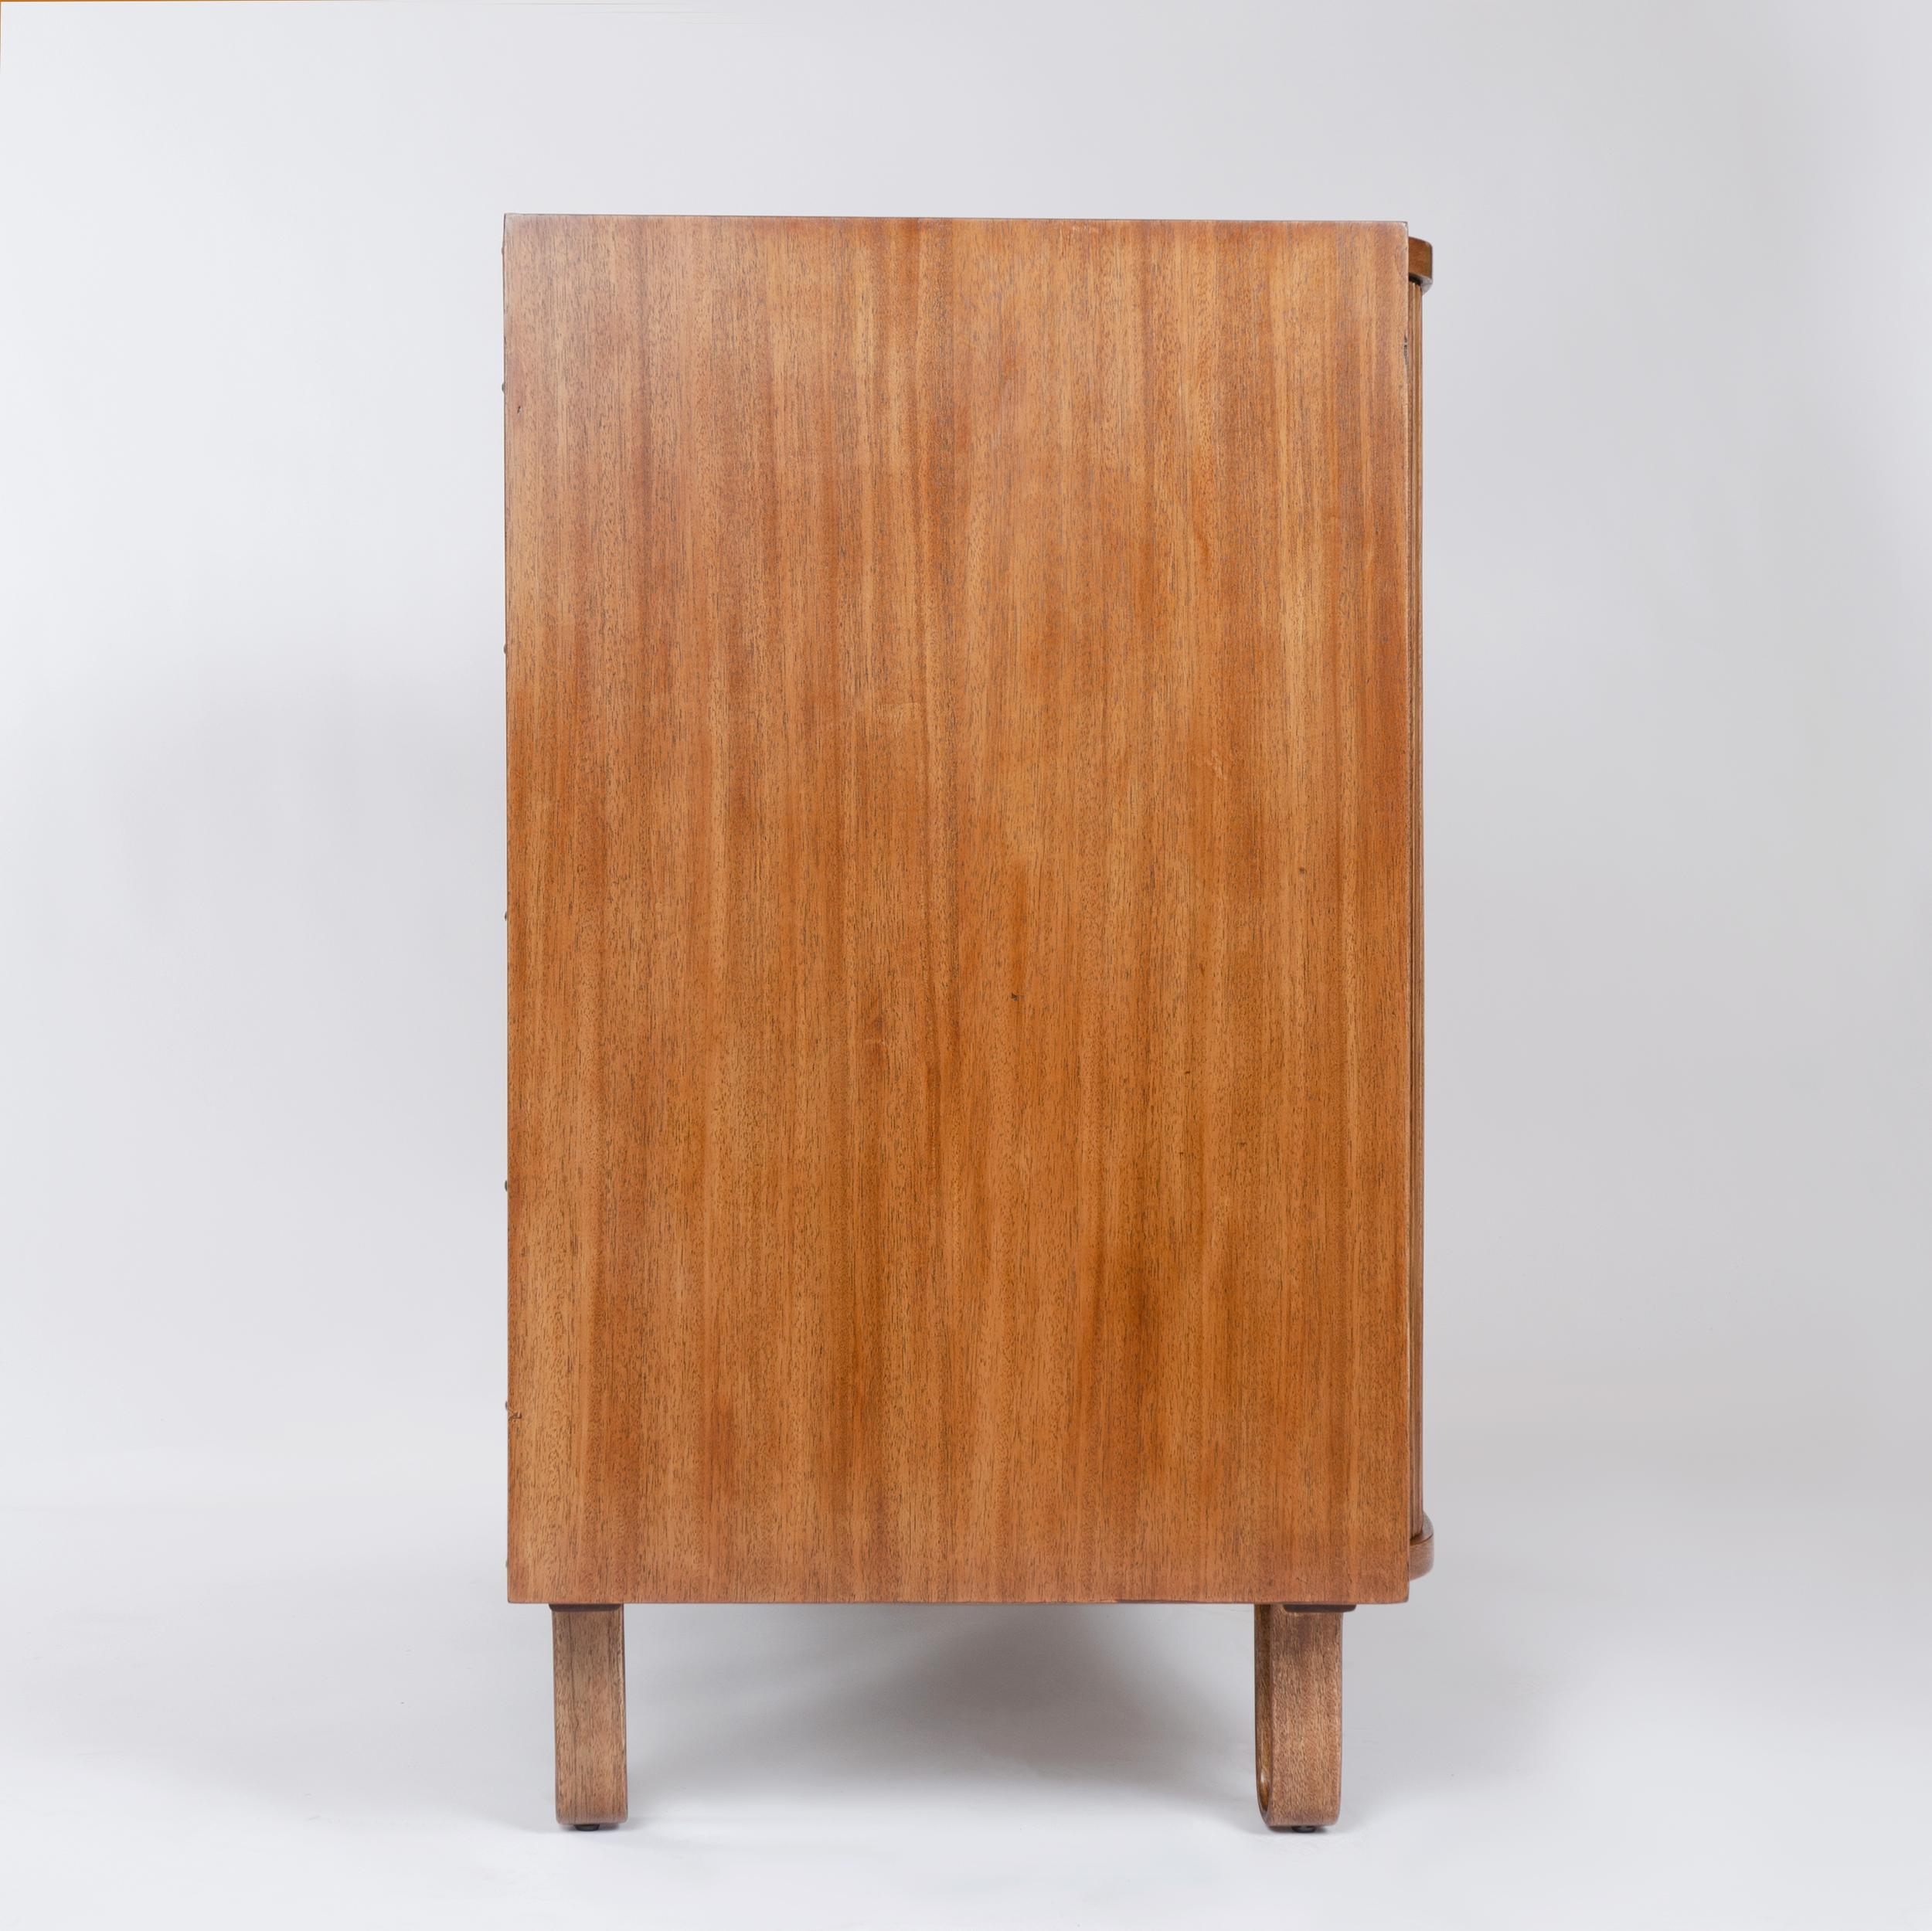 1950s Mister Cabinet in Mahogany by Edward Wormley for Dunbar 1